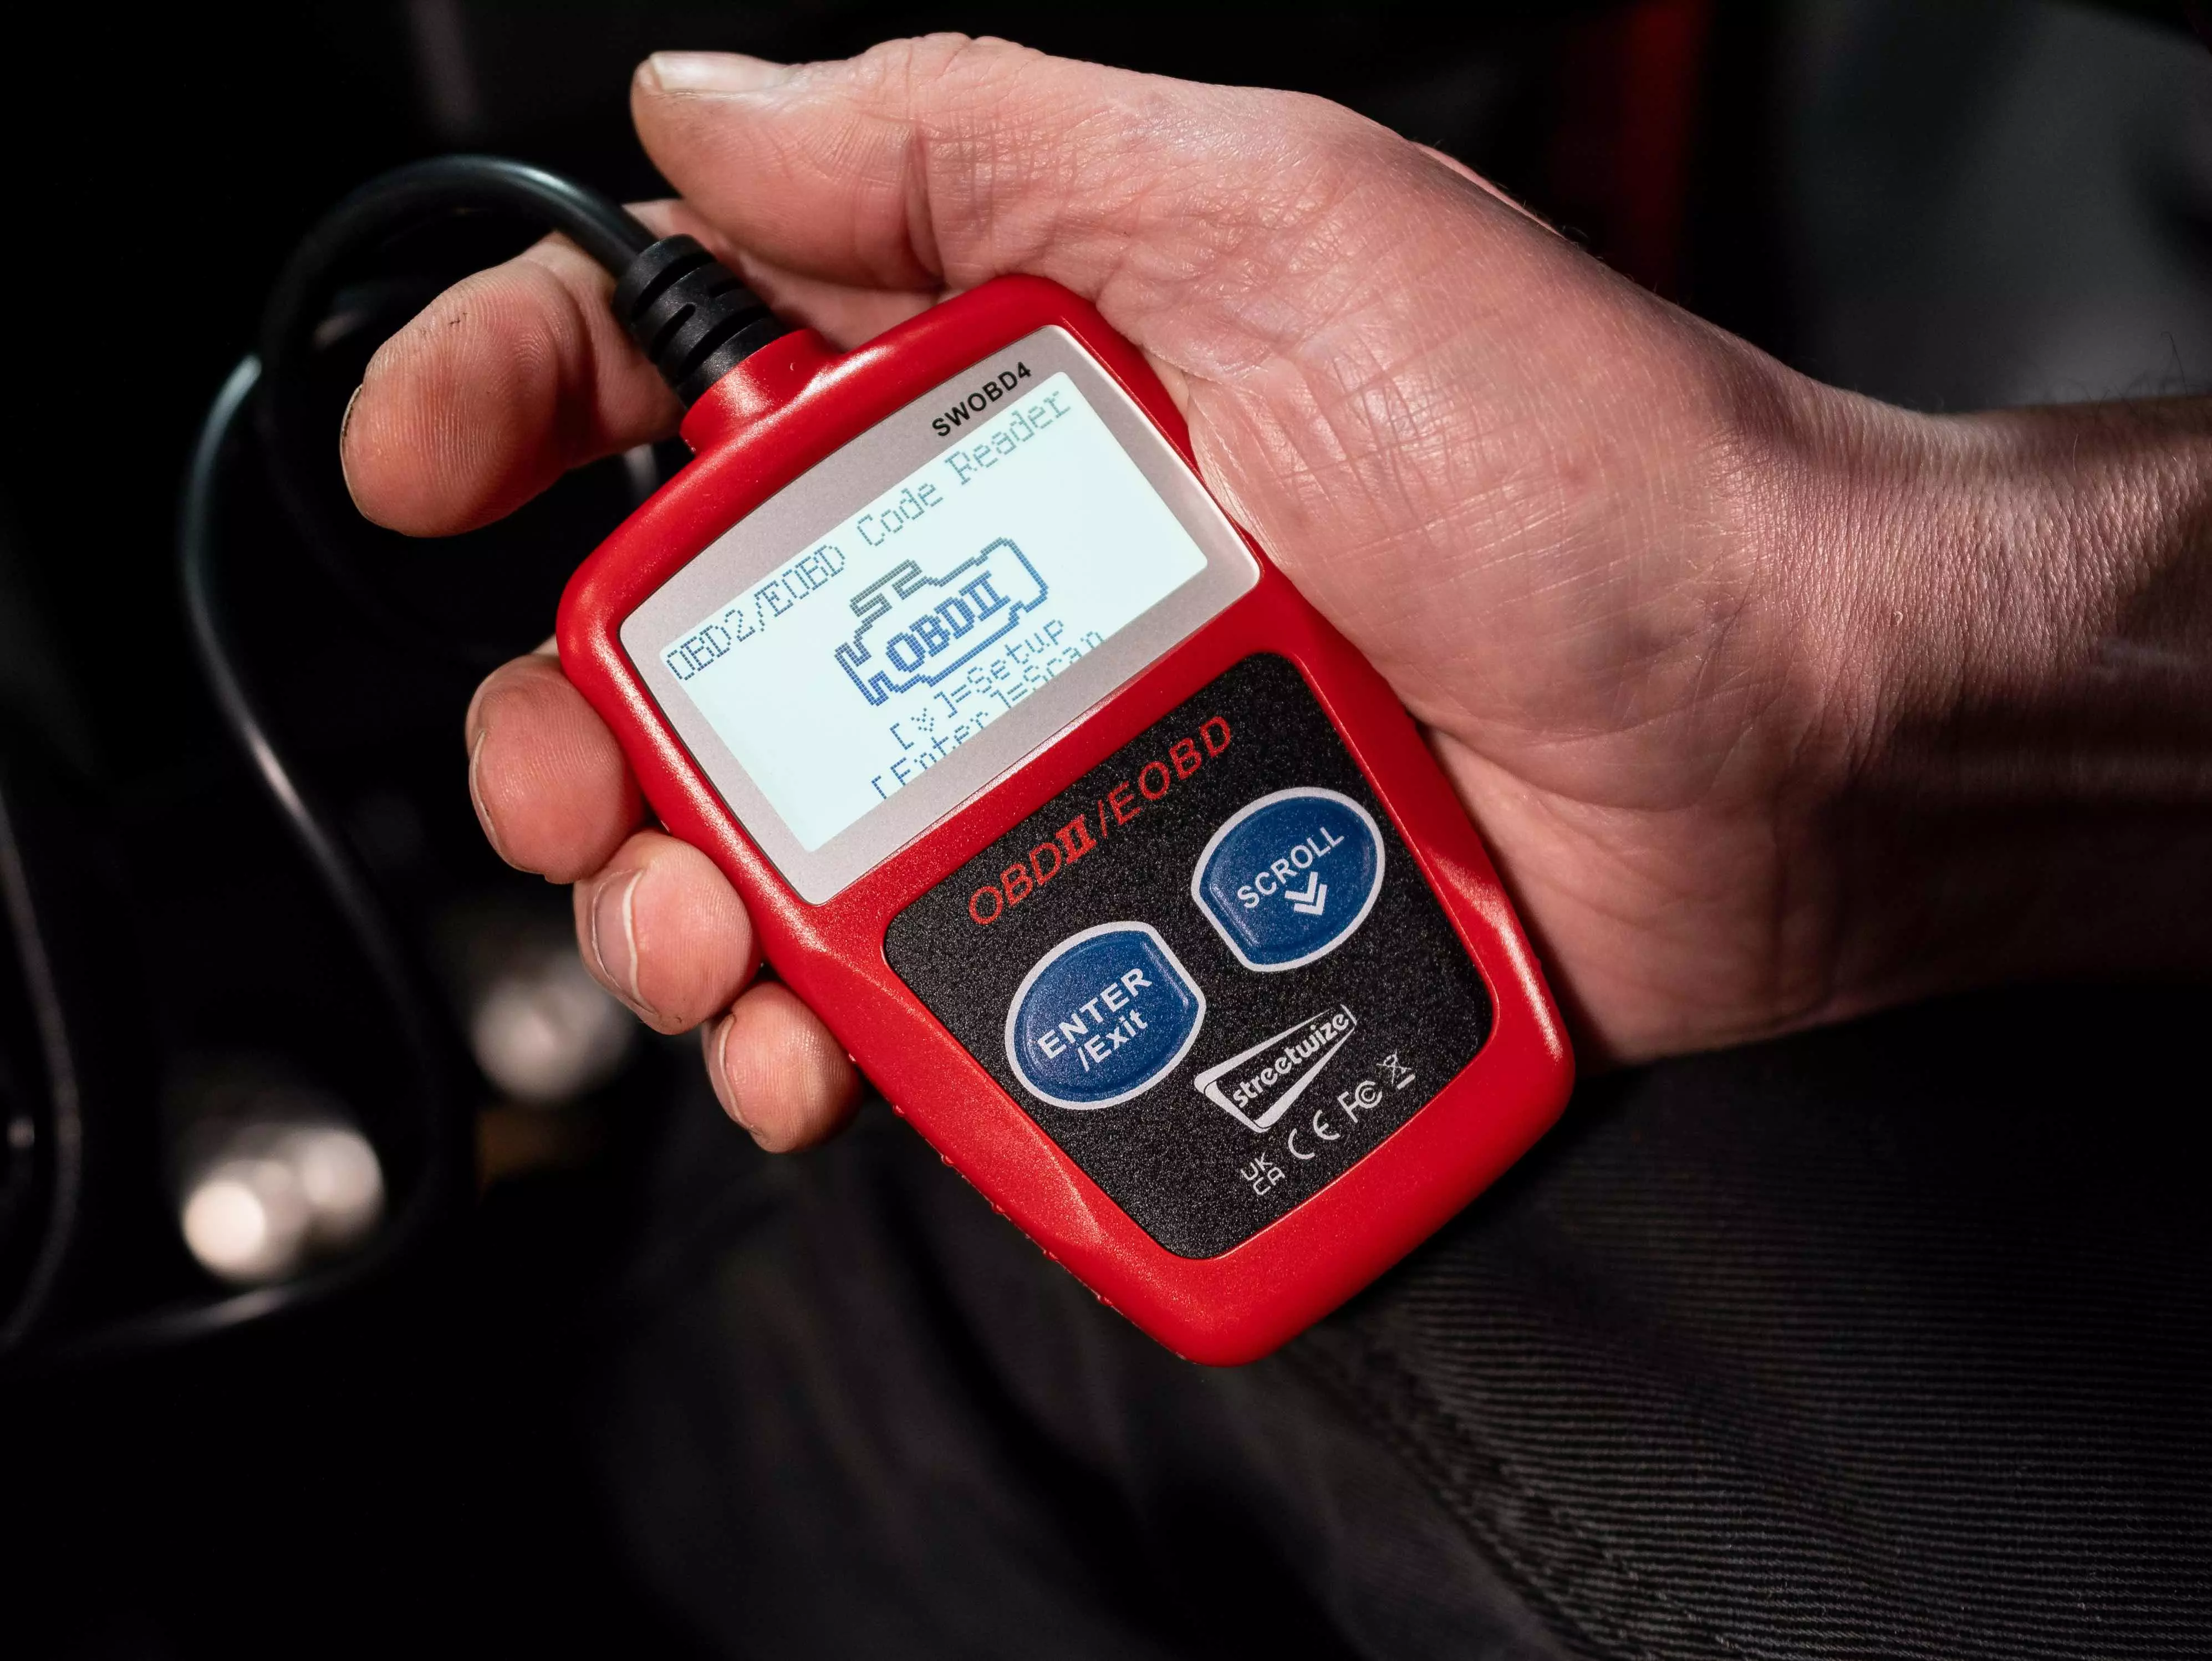 How To Use an OBD2 Scanner? - A Beginner's Guide 